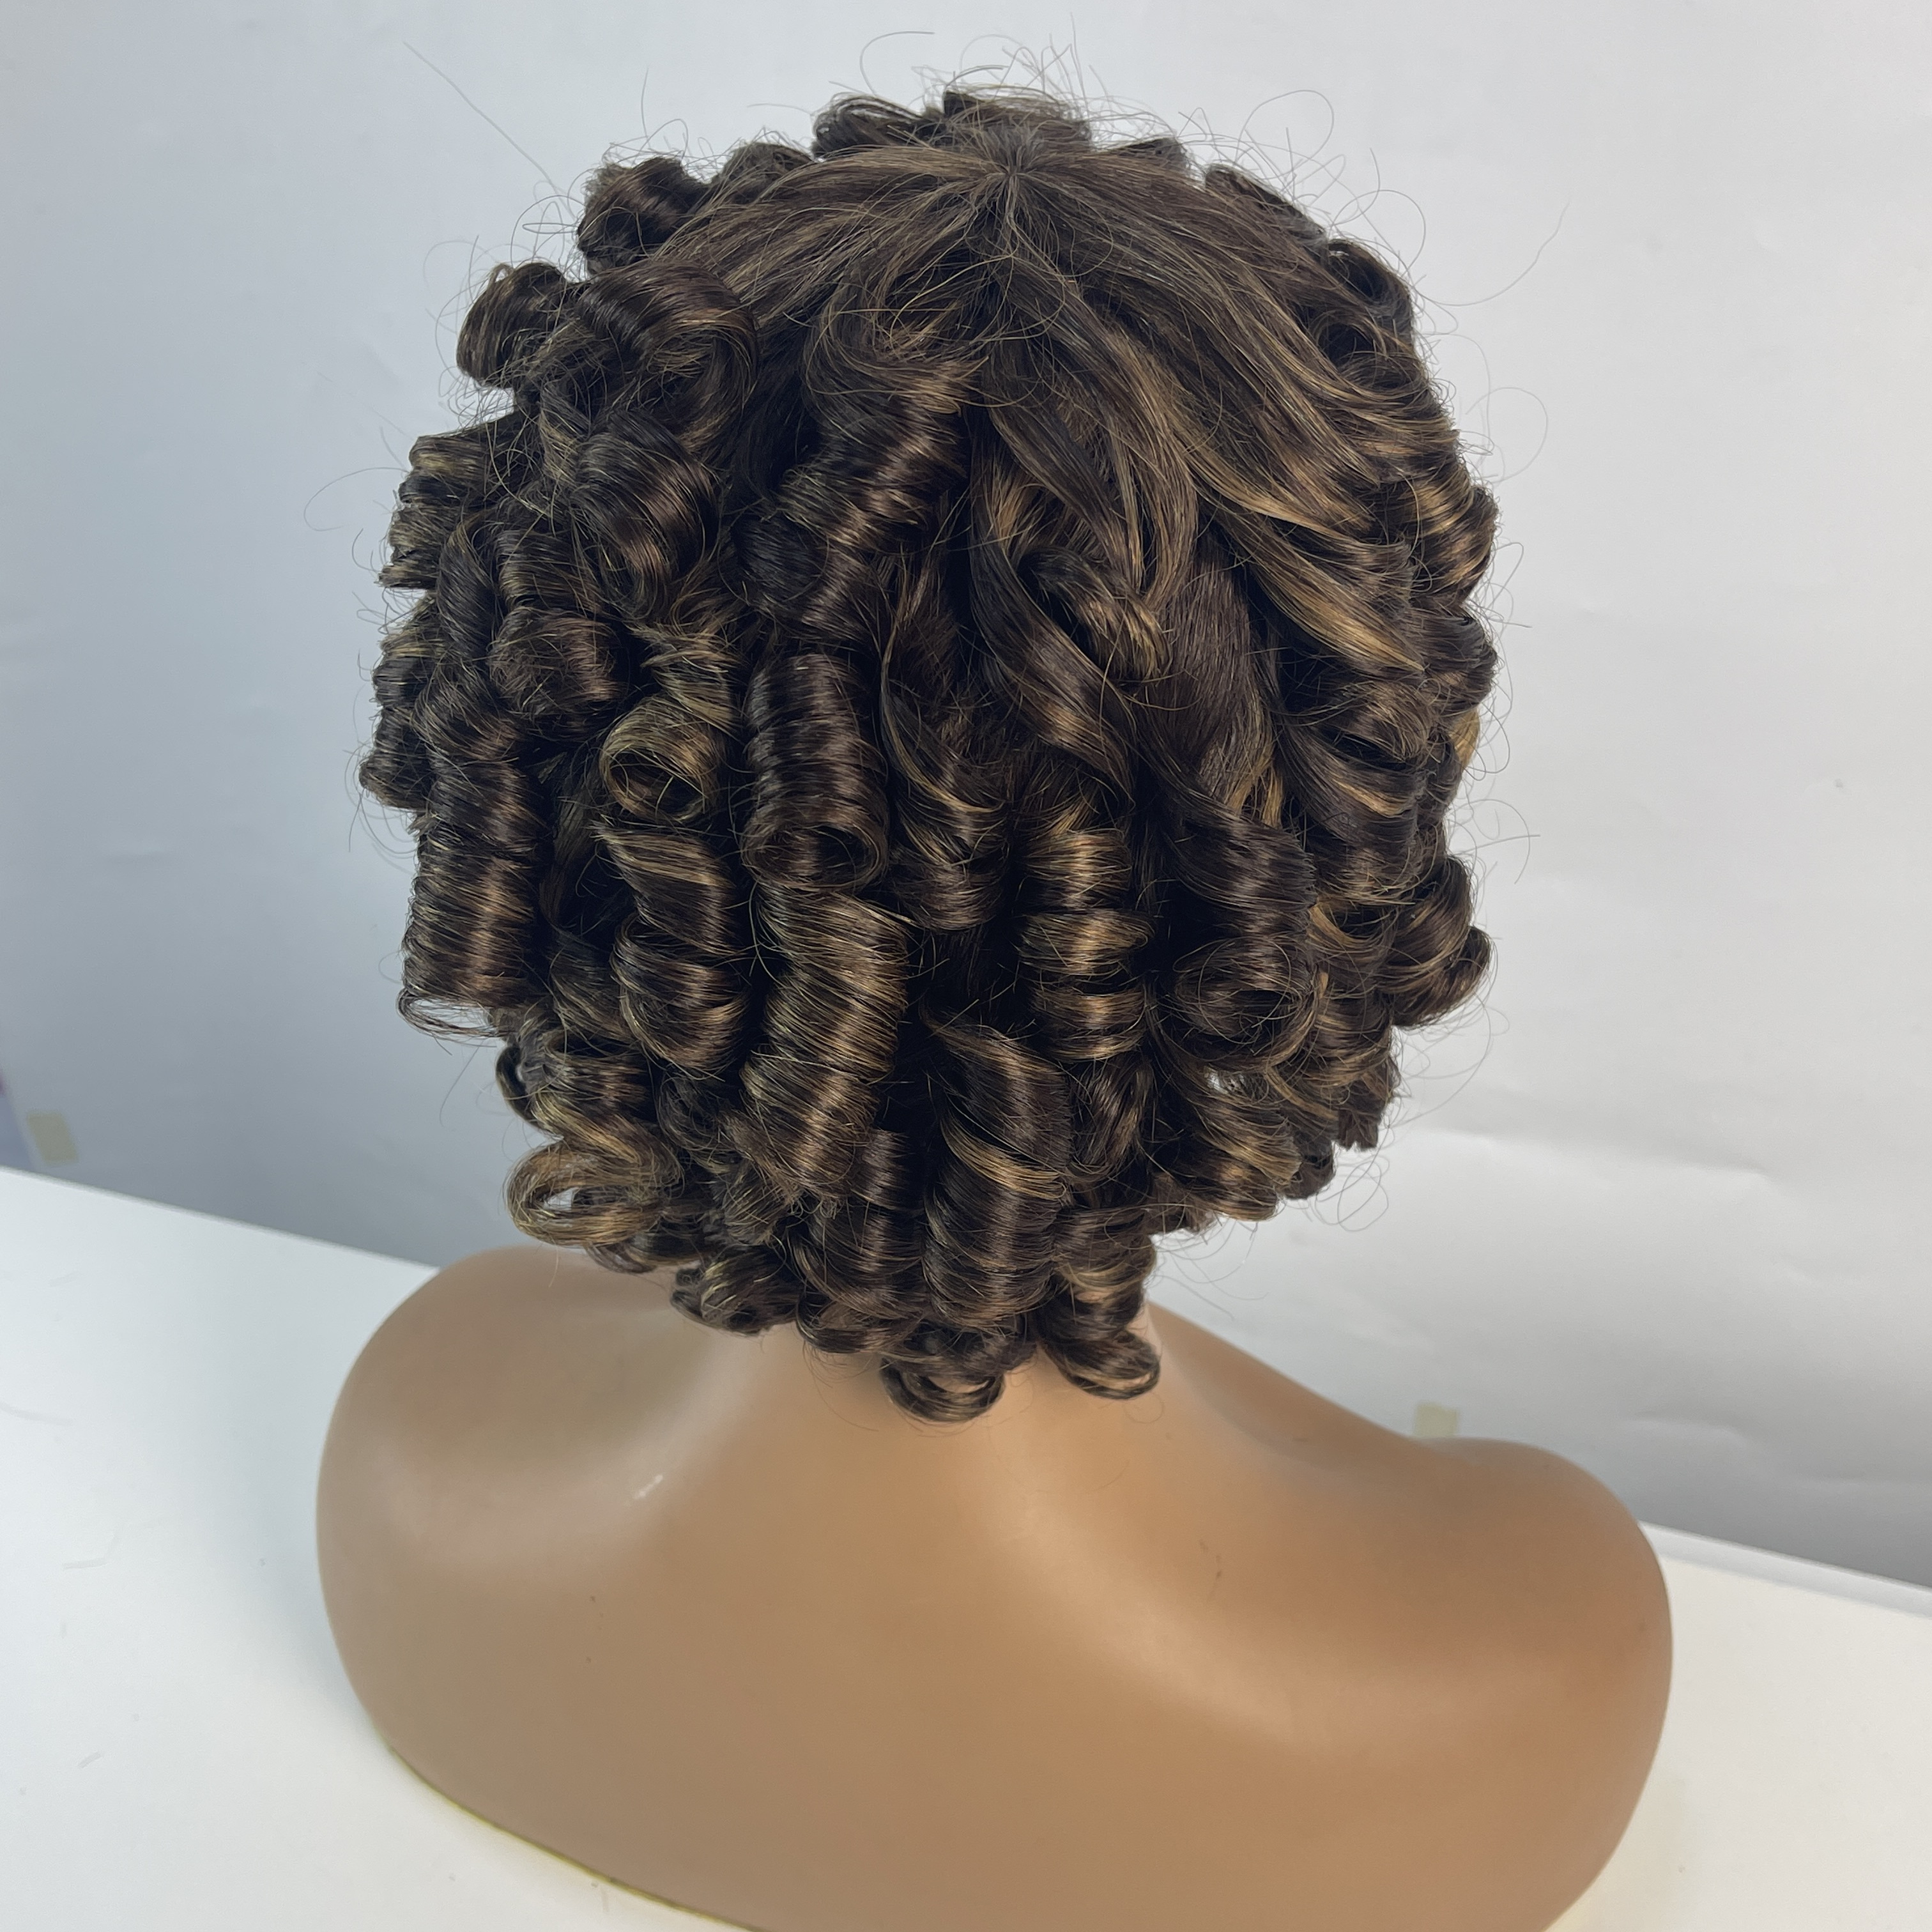 Short Kinky Curly Wig for Women Black Ombre Brown Human Hair Wigs Big Bouncy Fluffy Wavy Curly Wig